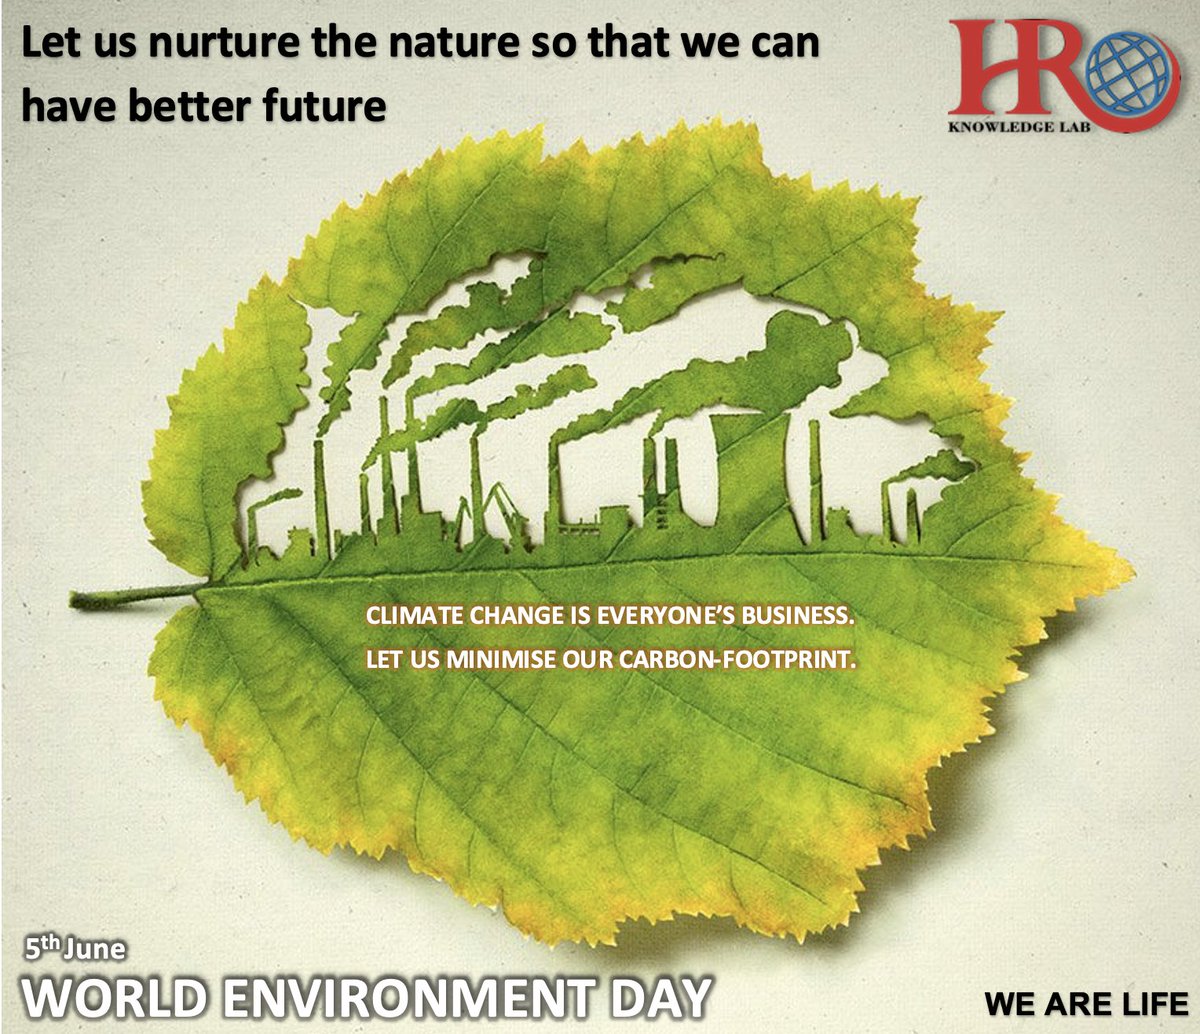 Plant a tree and have oxygen for free
#hrknowledgelab #illustriouscircle #hrklsolutions #hrklinnovation #hrklresearch #HRStrategy #hrsuccess #climatechange #environment #minimisecarbonfootprint #carboncleaning #minimisecarbonemissions #WorldEnvironmentDay #WorldEnvironmentDay2023